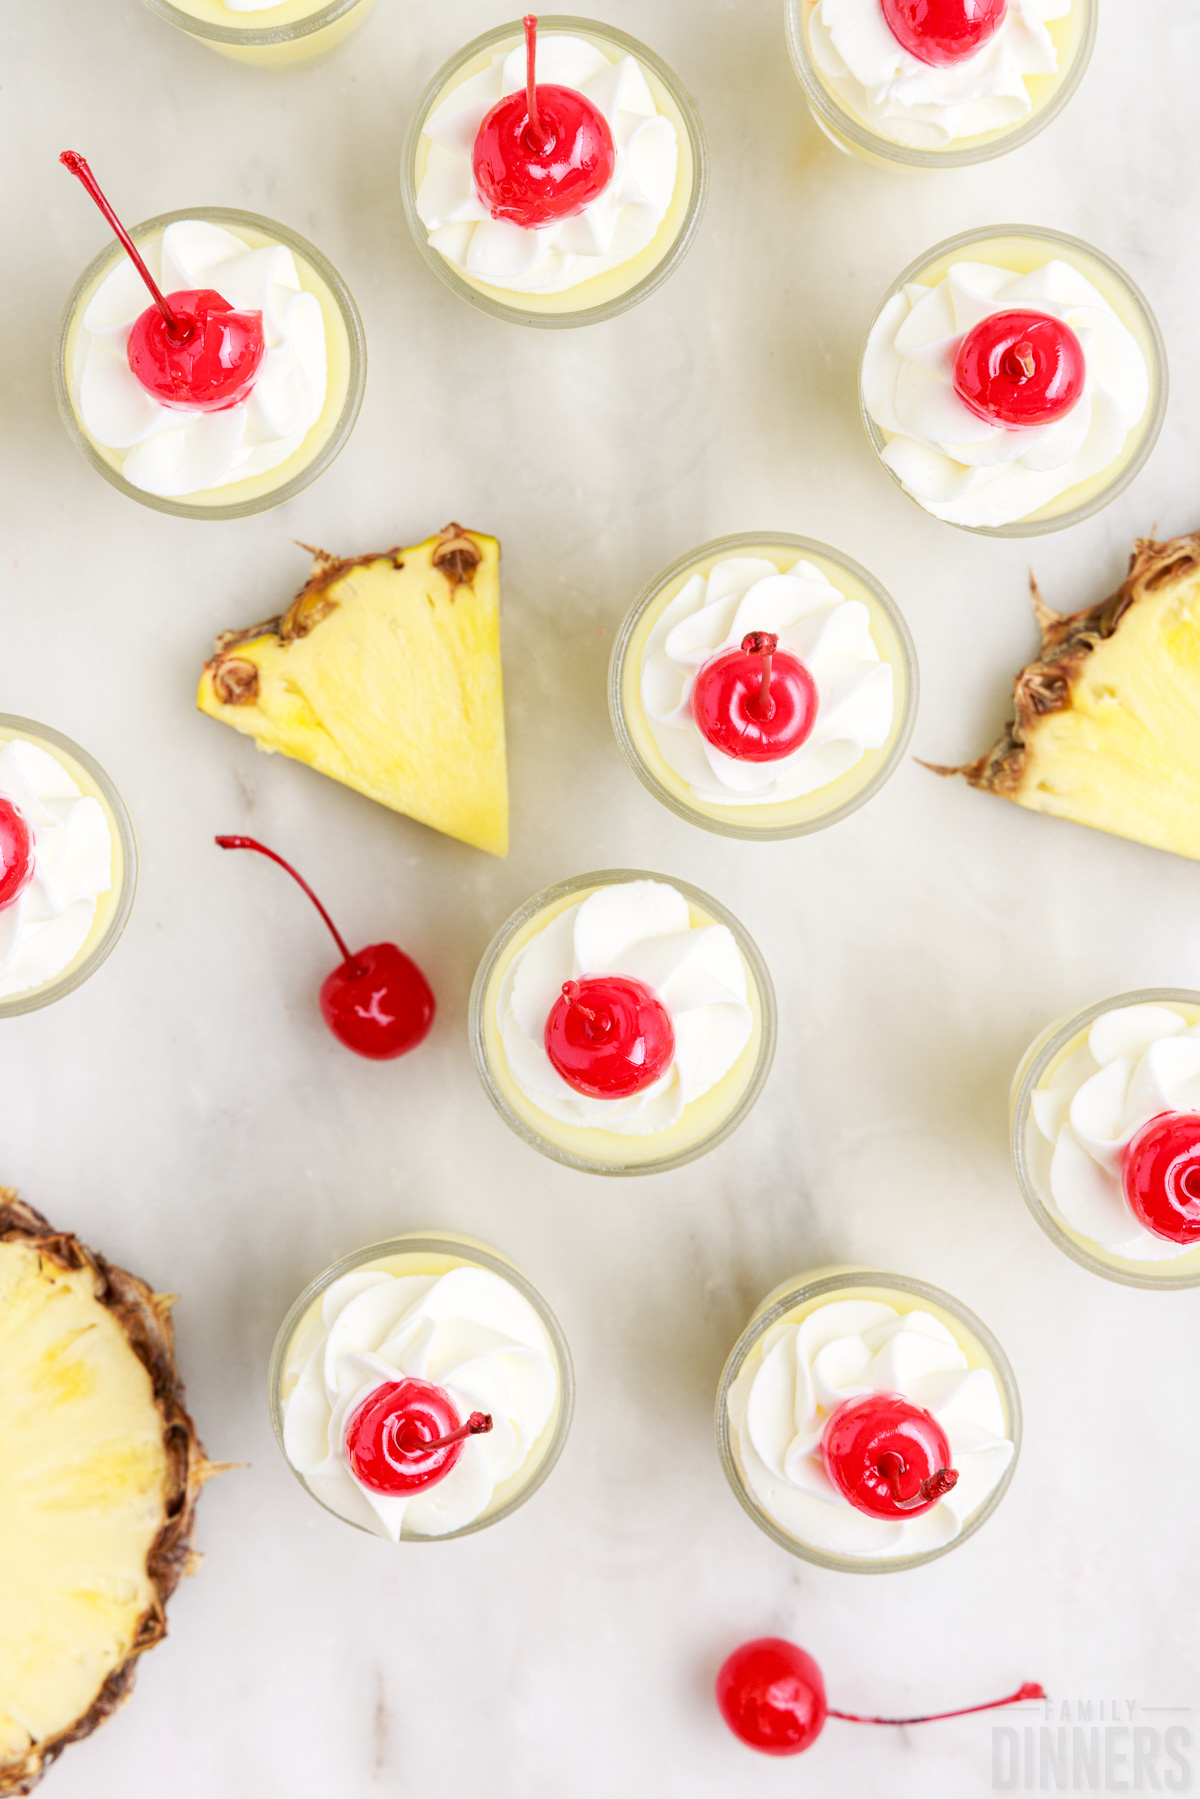 tops of pineapple jello shots with whipped cream and a maraschino cherry